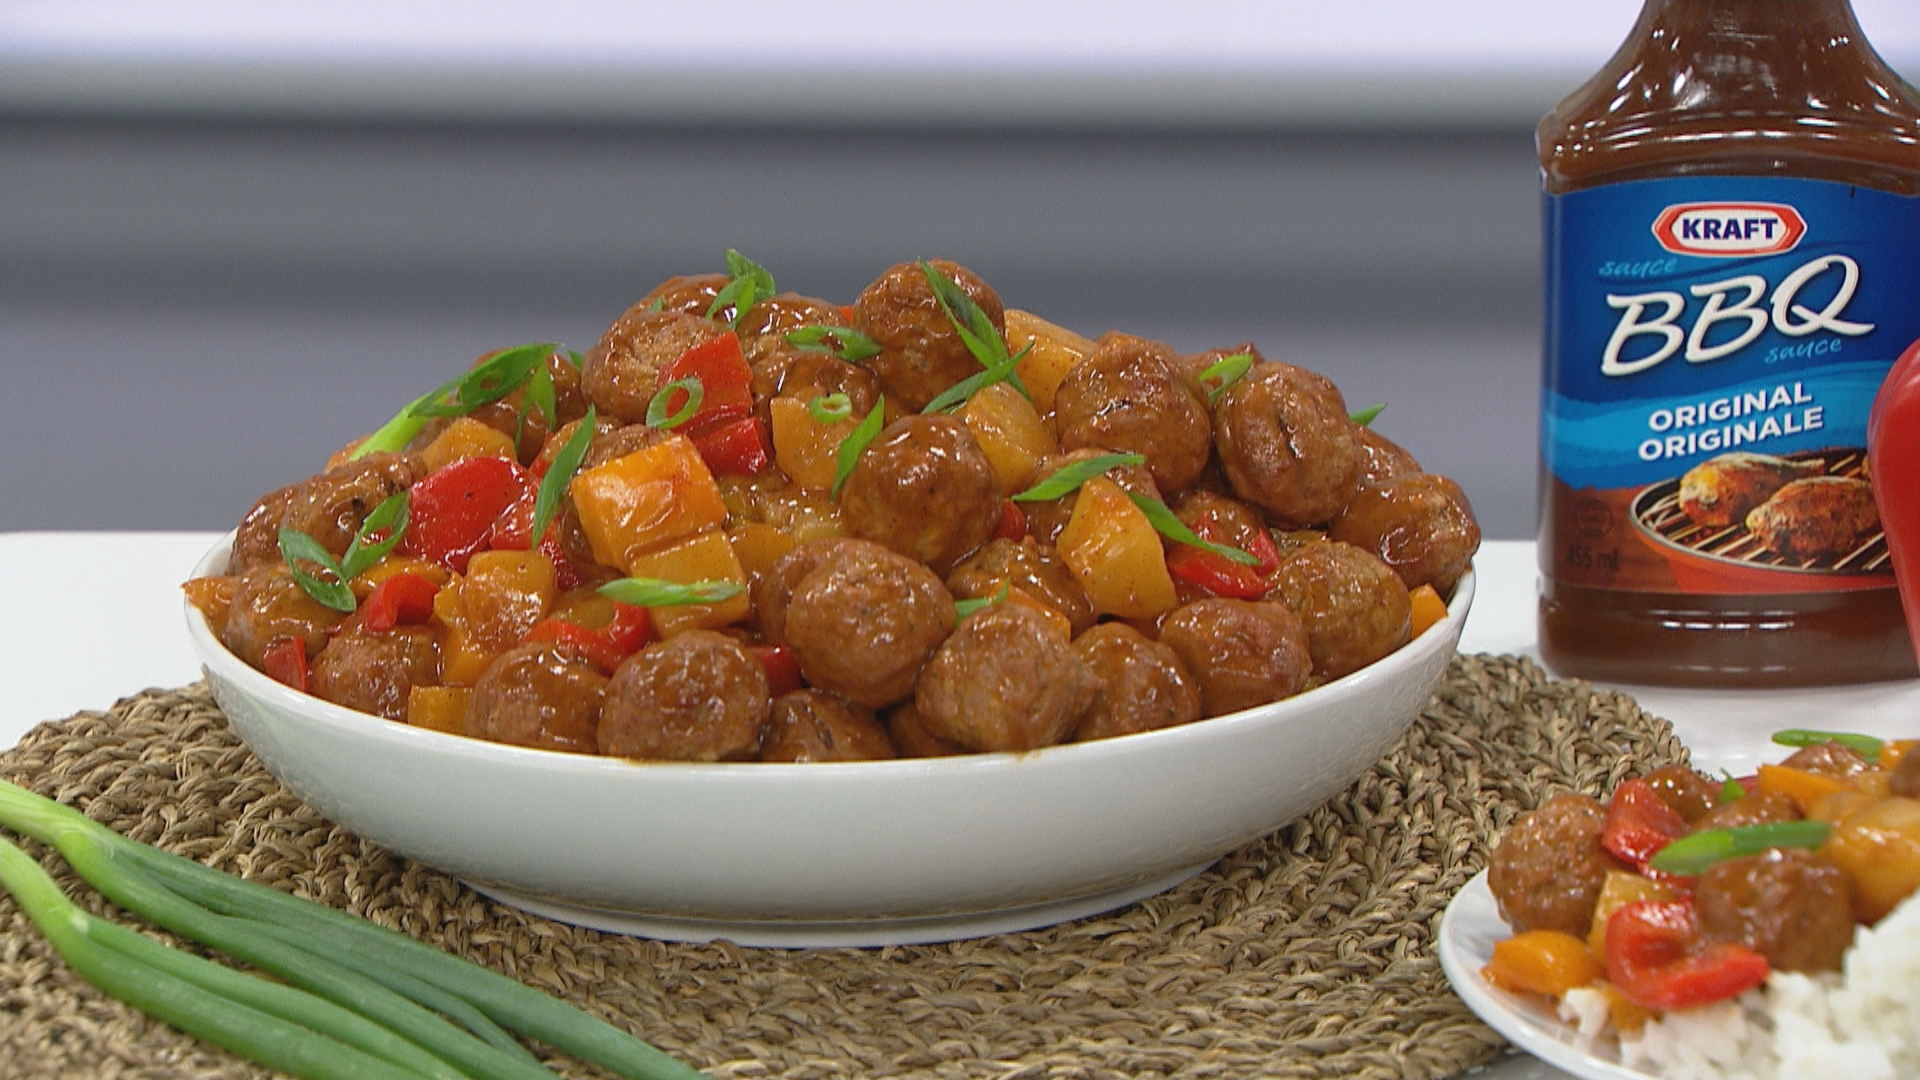 Sweet and tangy pineapple meatballs